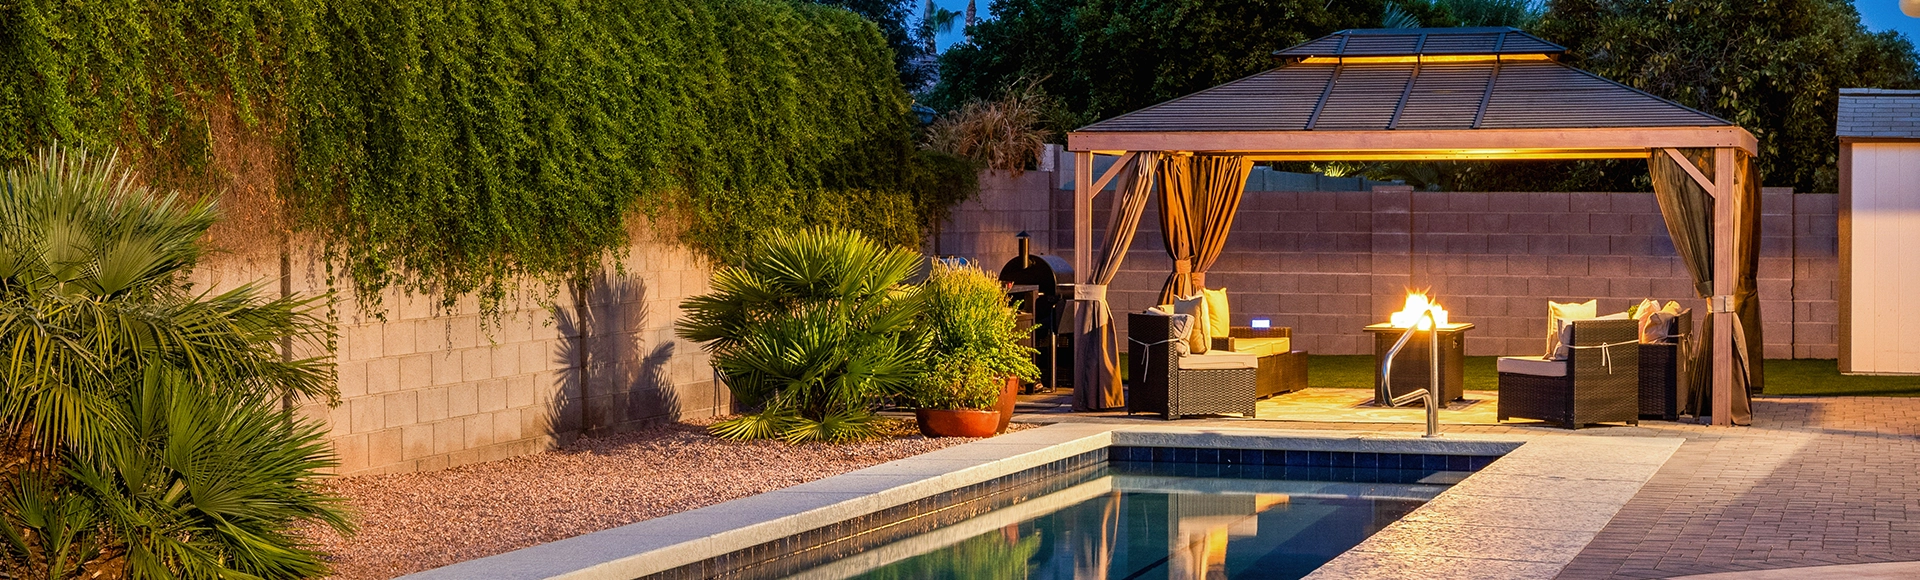 Bright pergola at night by a paving stone wall and patio. 